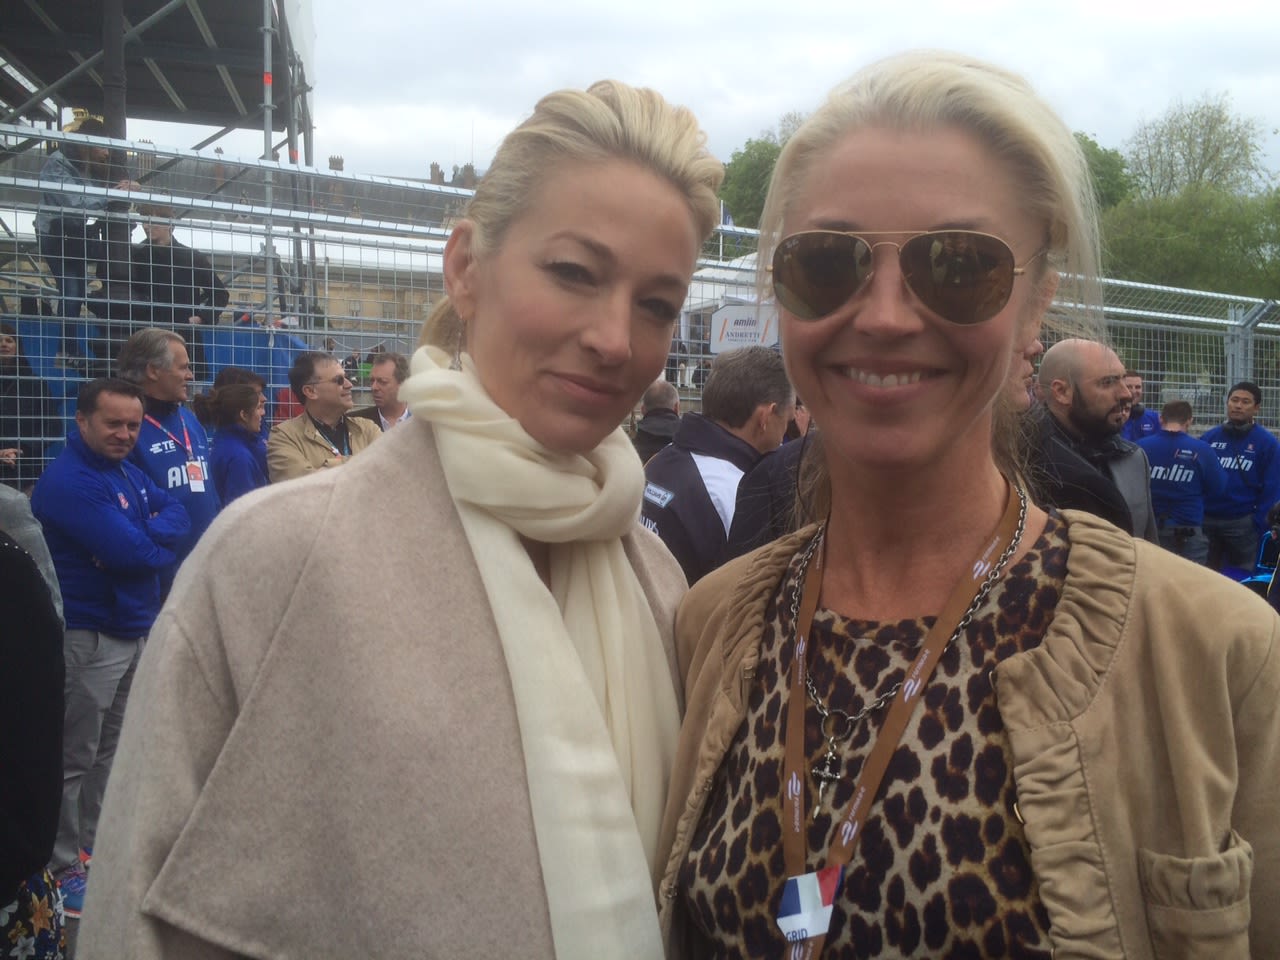 It was standing room only on a stylish Paris starting-grid before the race. Celebrites included model Eva Herzigova and British socialite Tamara Beckwith (pictured right). 